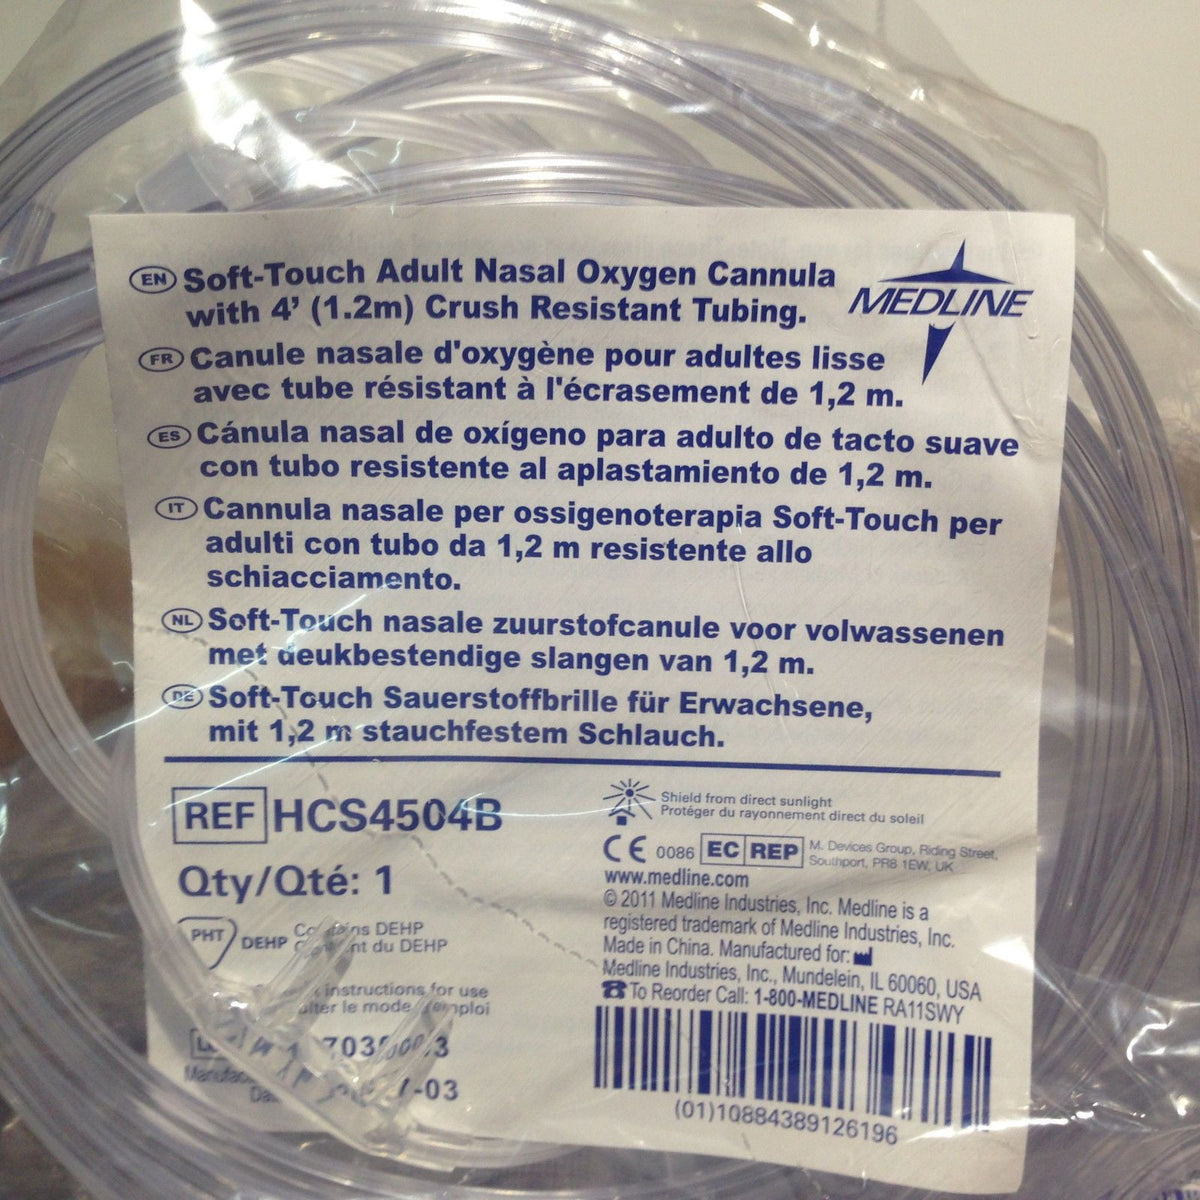 Informational label on the packaging of a cannula for Vital Reaction&#39;s molecular hydrogen&#39;s inhalation machines.